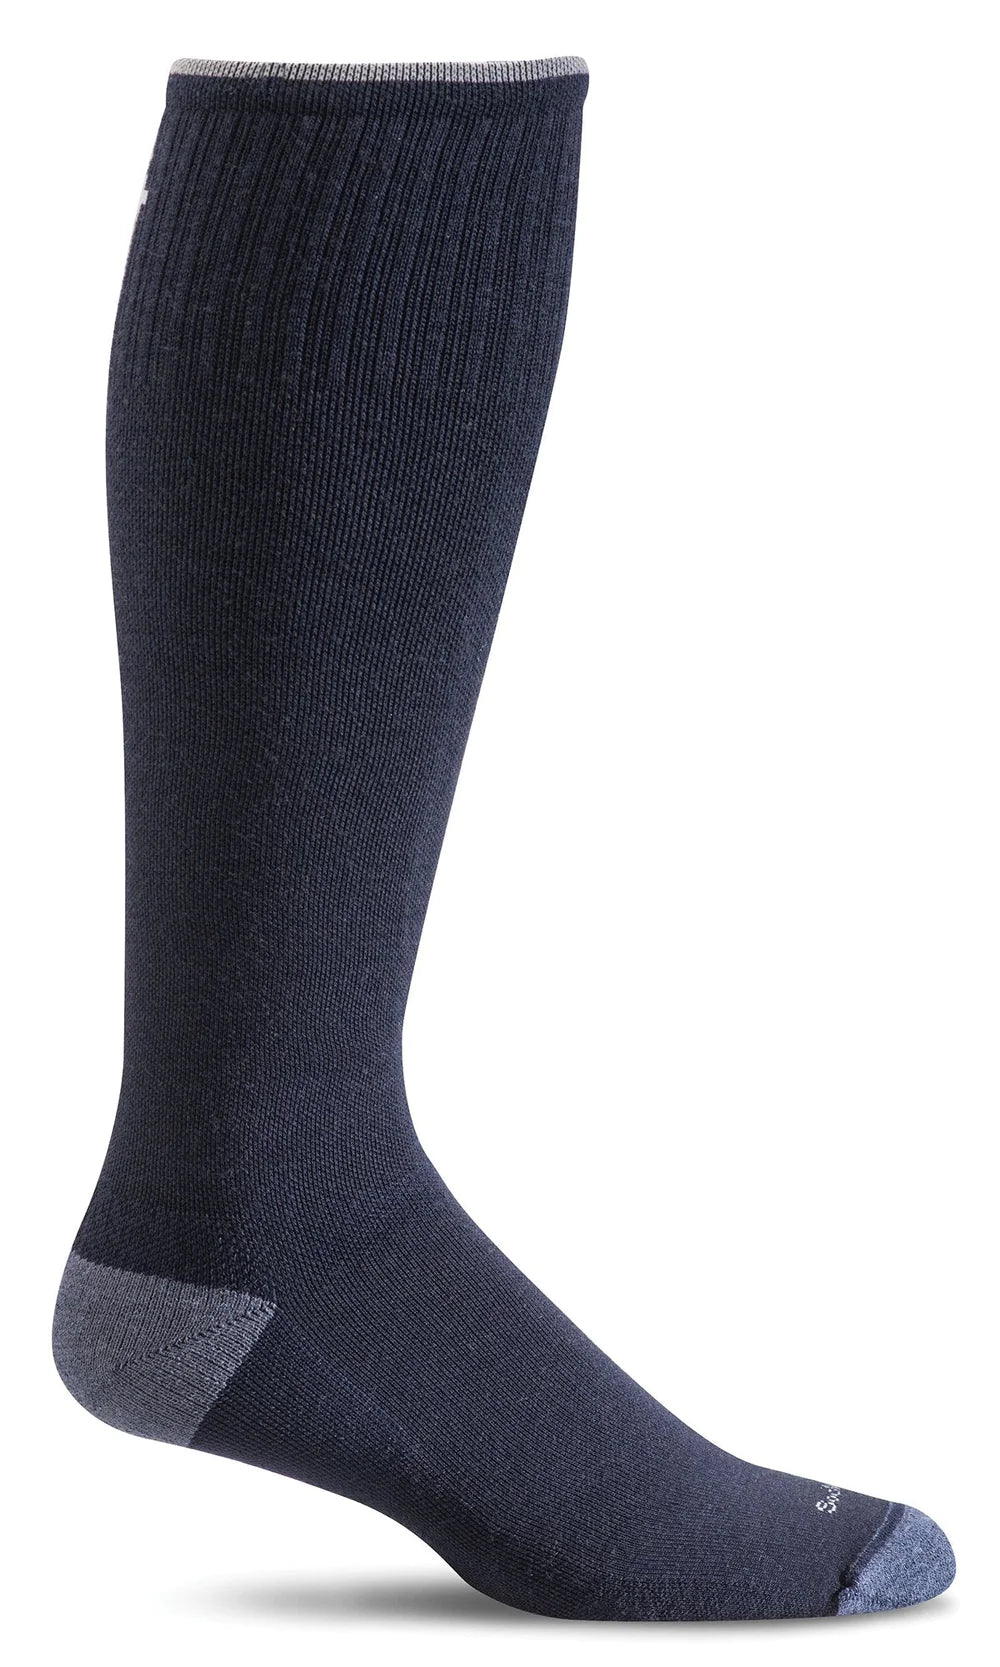 Elevation Men's Bamboo/Merino Firm Compression Socks in Navy - Size L/XL - The Sockery